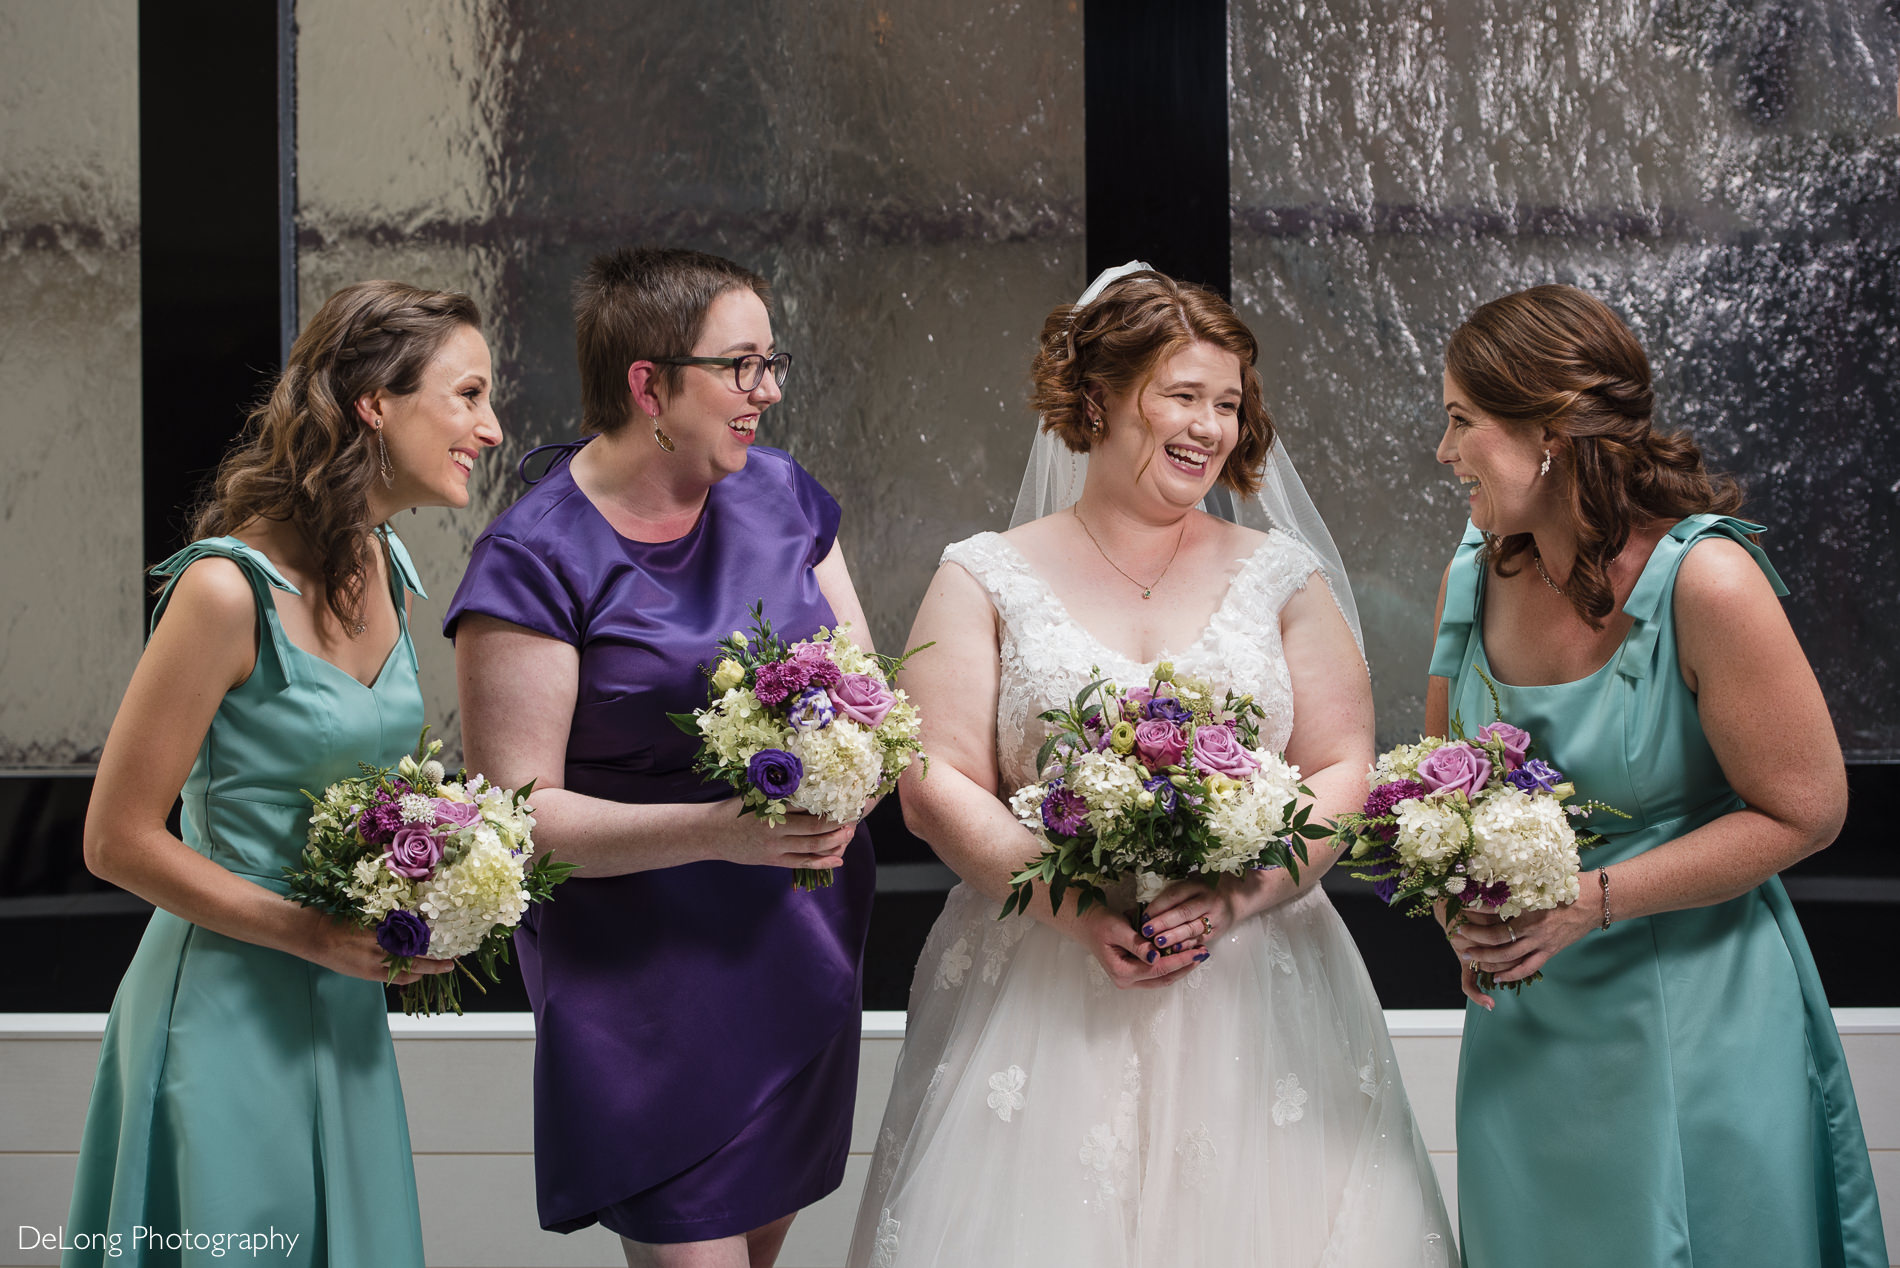 Bride and bridesmaids happy photo in atrium of Embassy Suites by Hilton Charlotte by Charlotte wedding photographers DeLong Photography